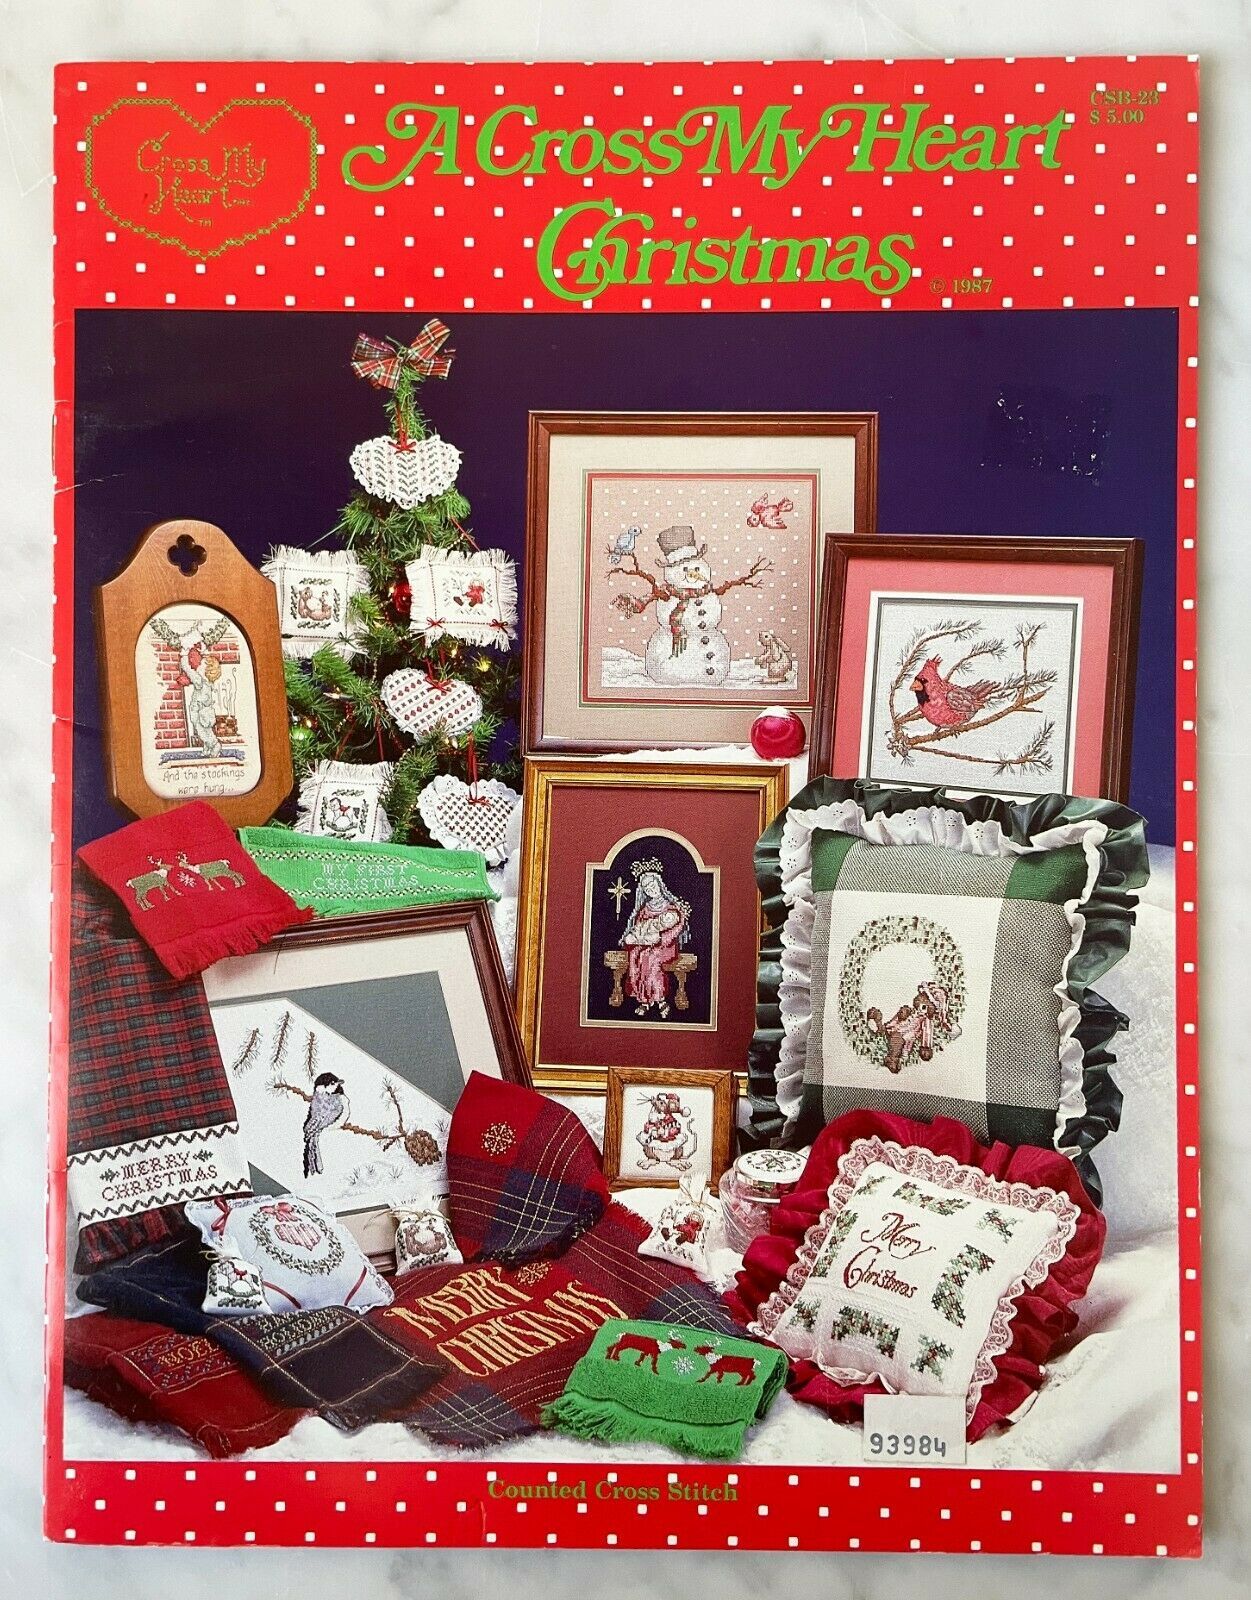 Vintage 1987 A Cross My Heart Christmas Counted Cross Stitch Designs Patterns - $9.45